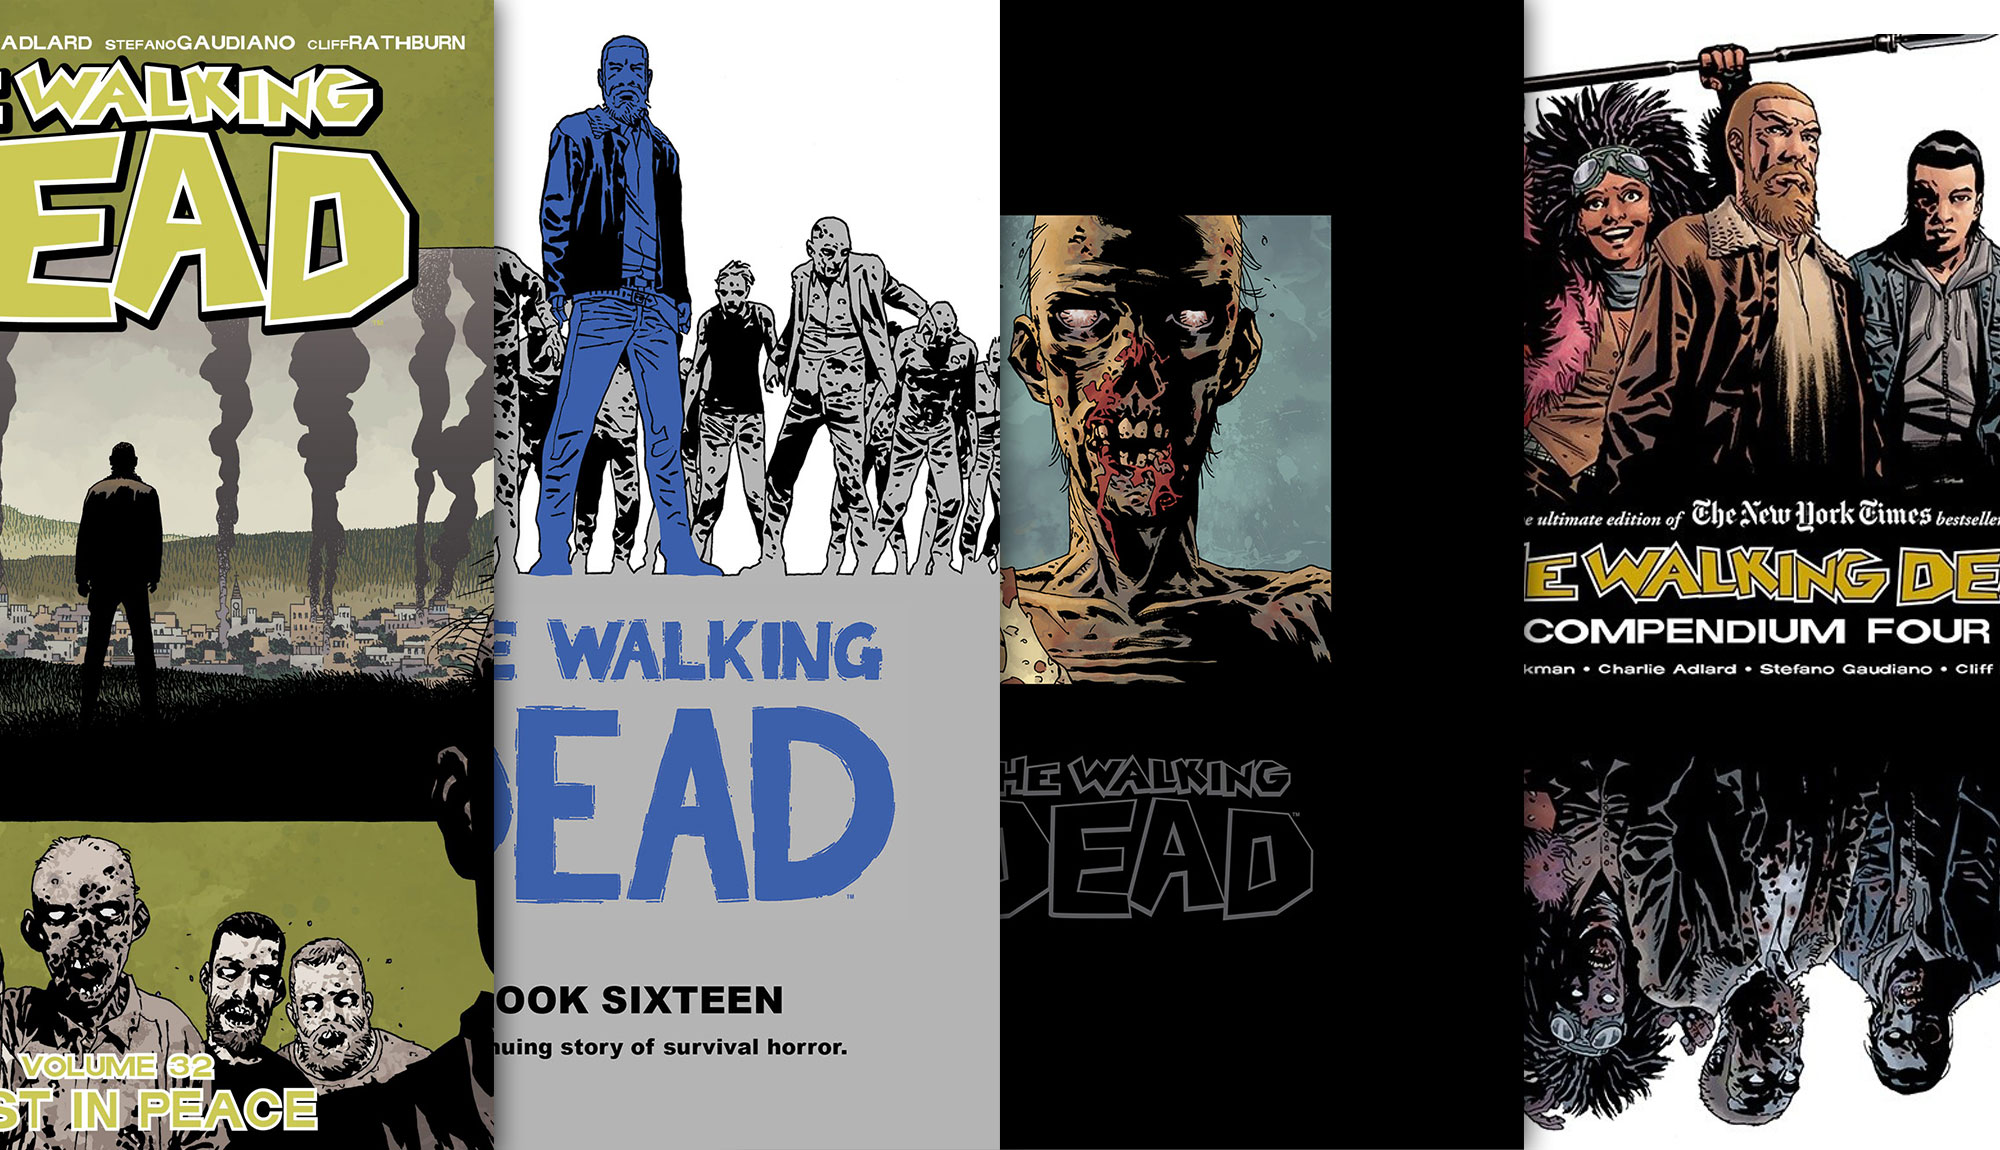 All Collected Editions of The Walking Dead Set To Release After Issue 193